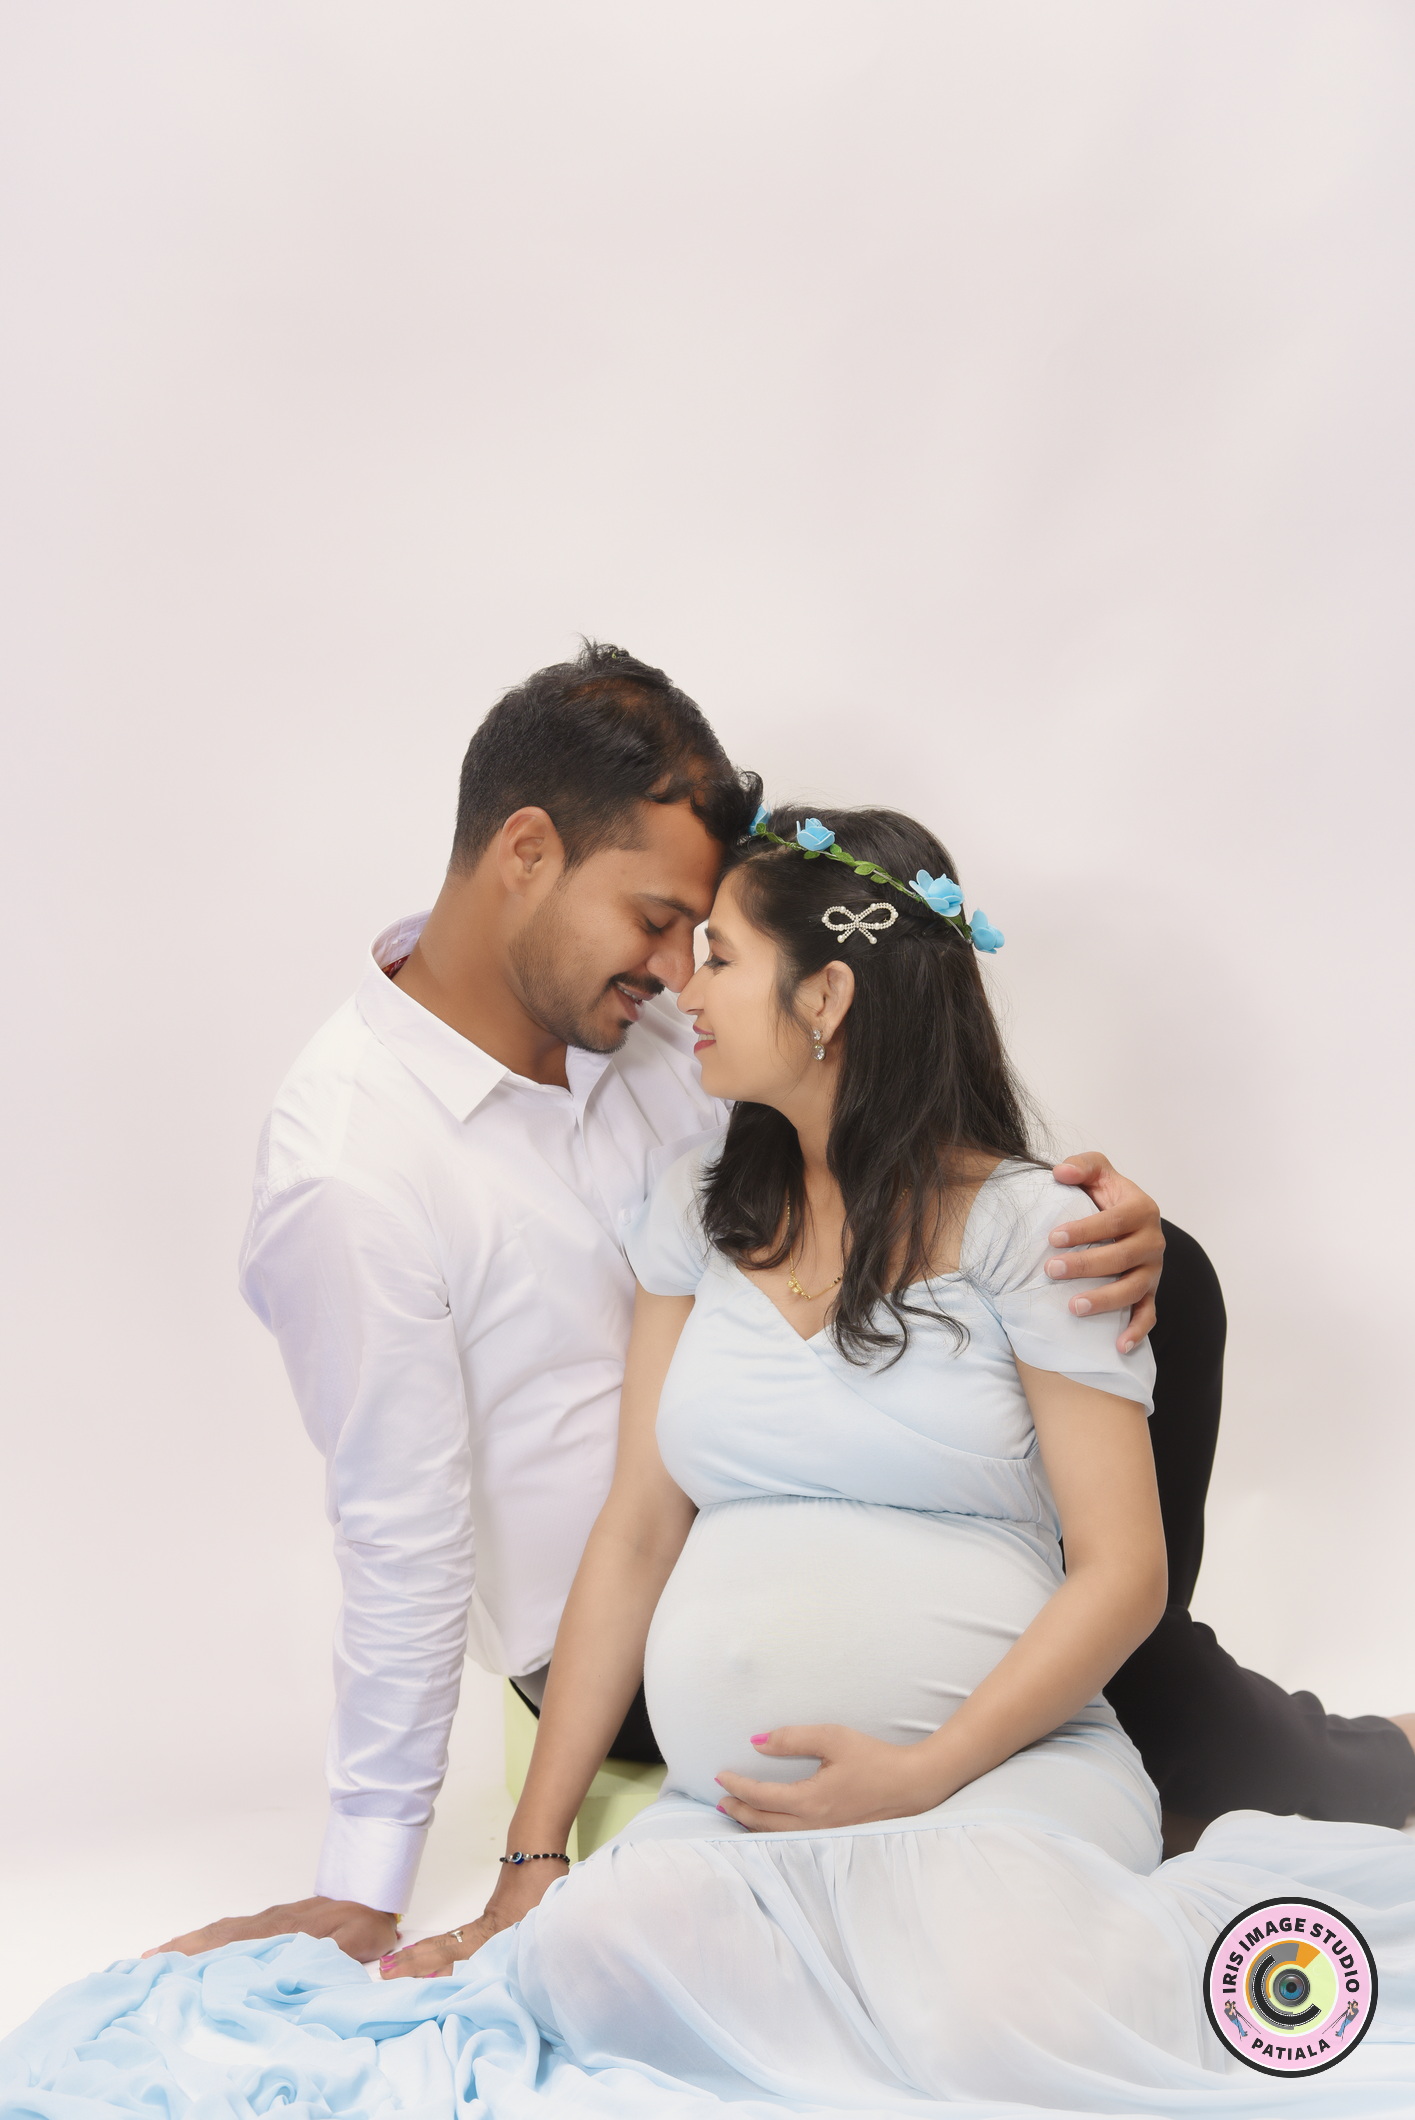 Studio Maternity Sessions and Why I Love Them